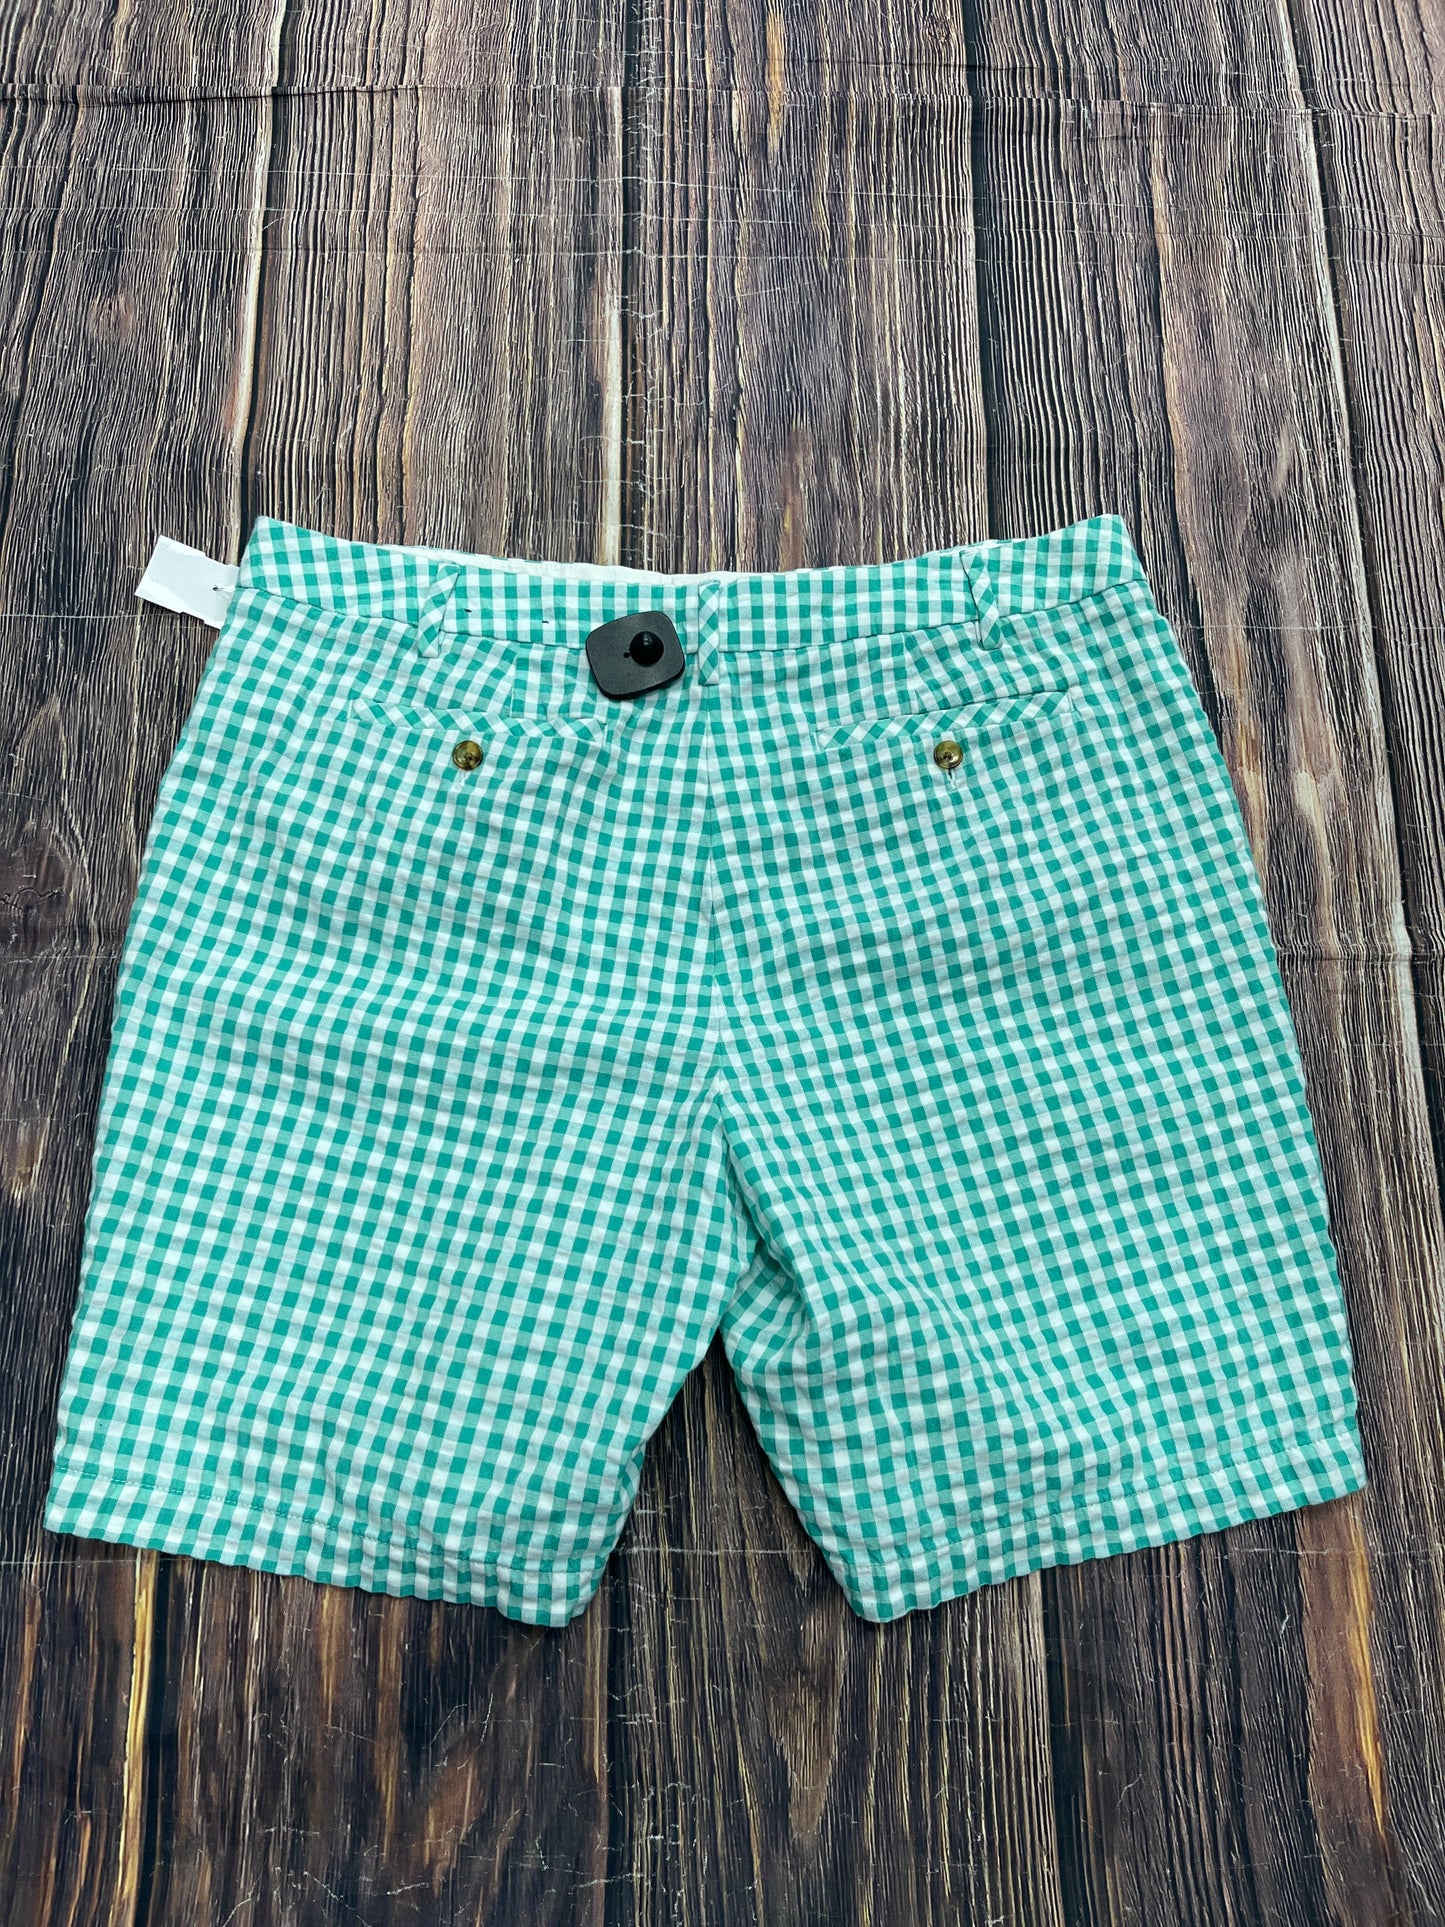 Green Shorts Lands End, Size 14